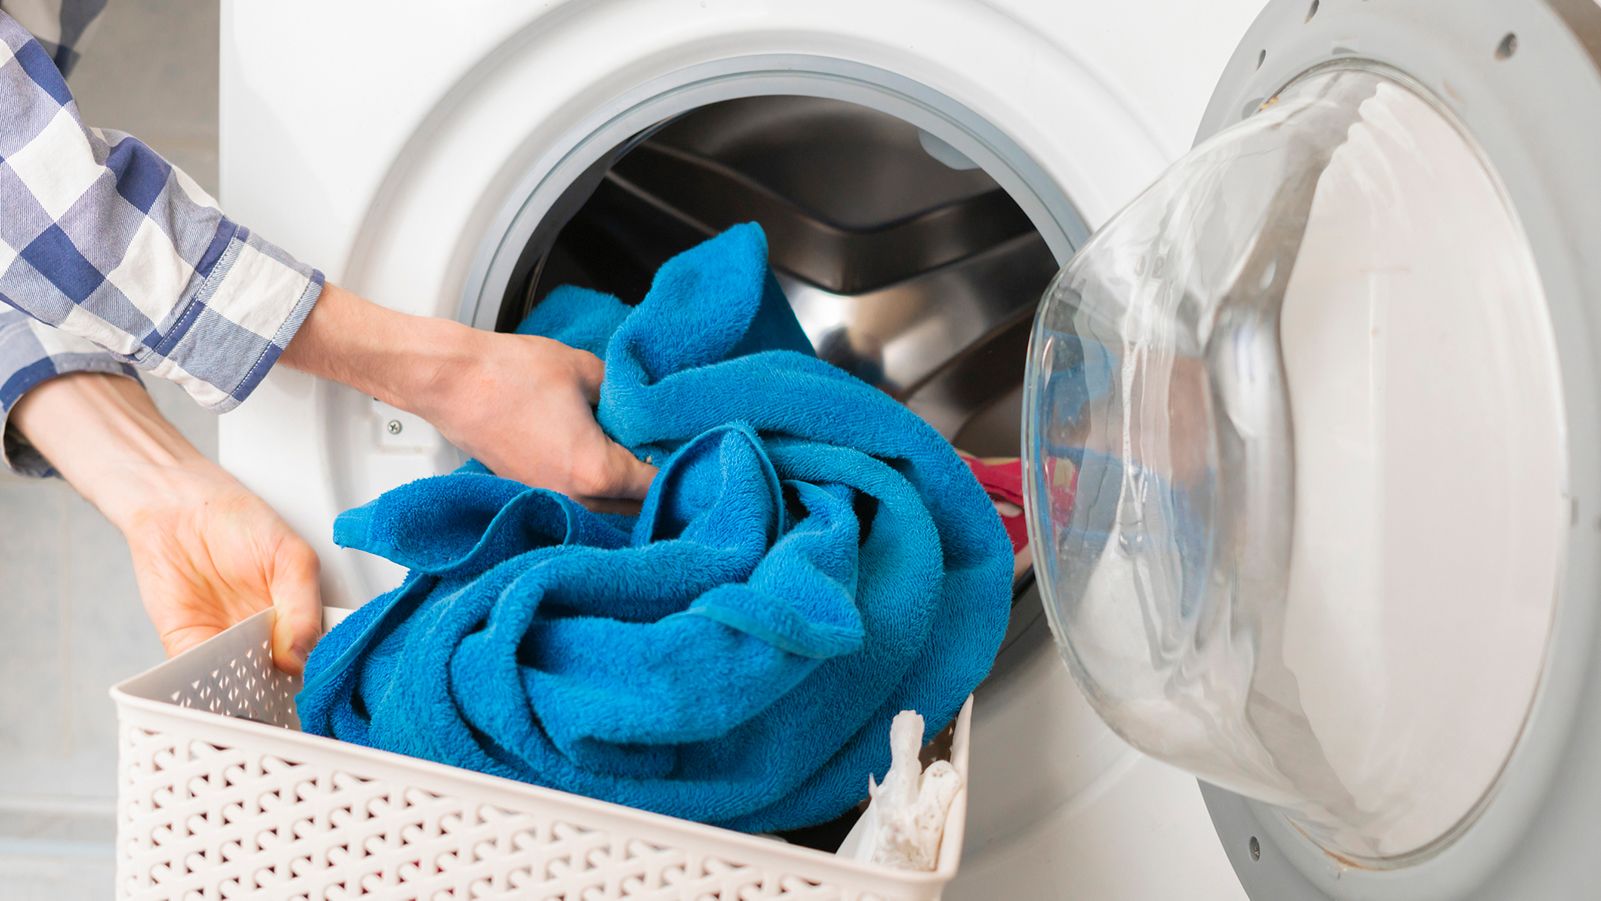 How to clean a dryer: Vent, ducts and lint traps | CNN Underscored